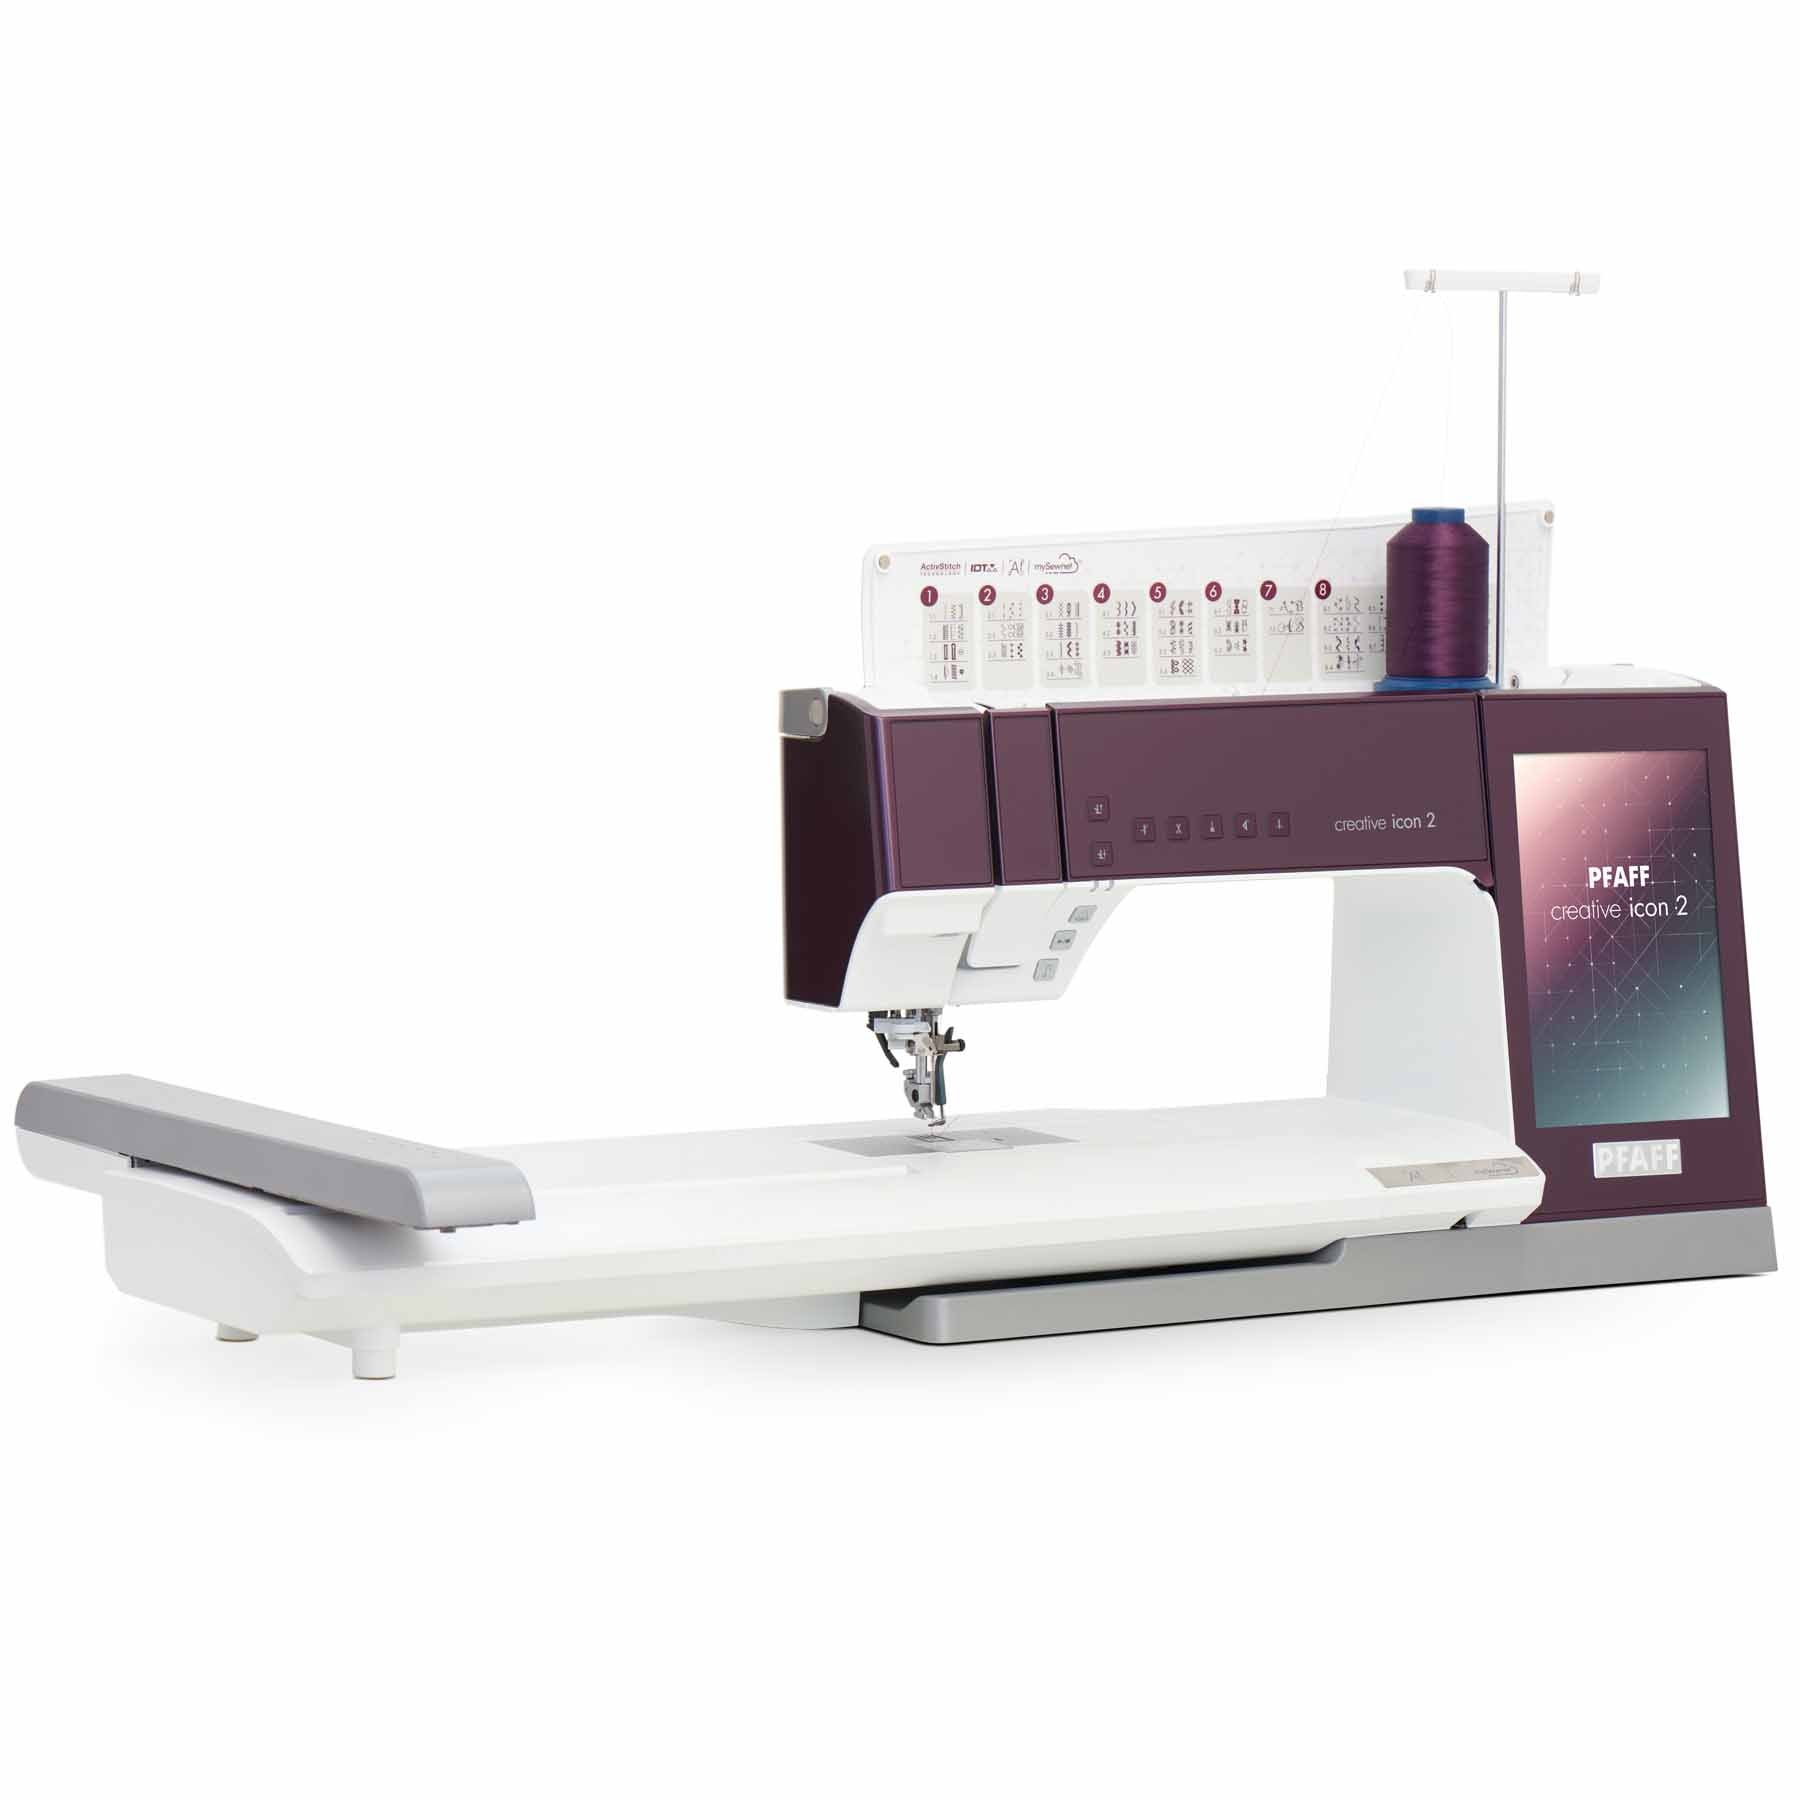 PFAFF Creative Icon 2 Sewing and Embroidery Machine